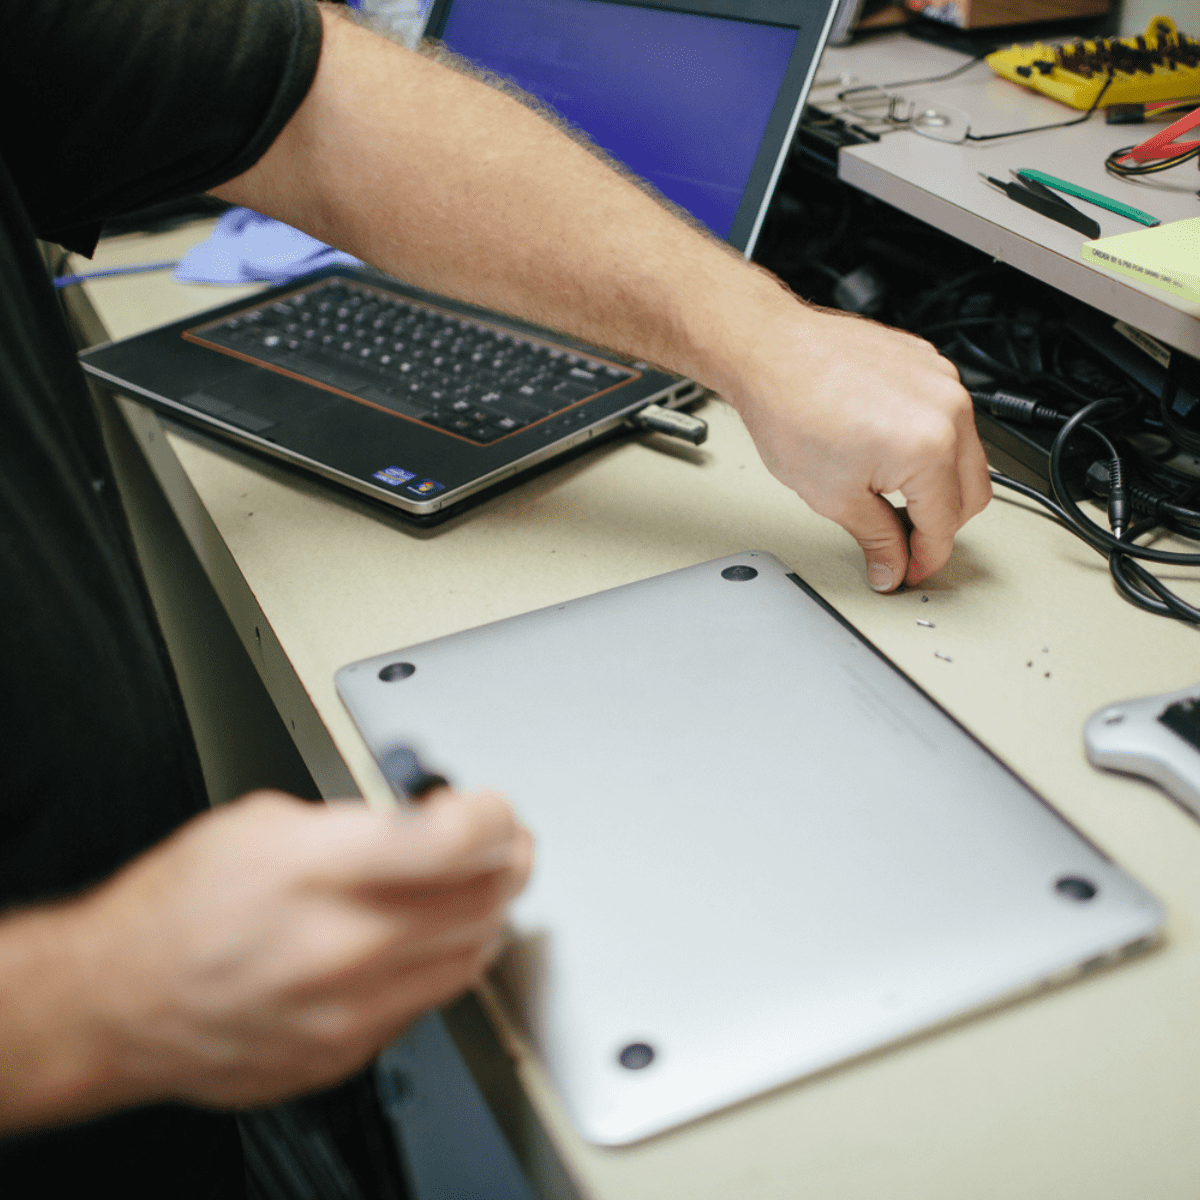 Close up of hands repairing a laptop